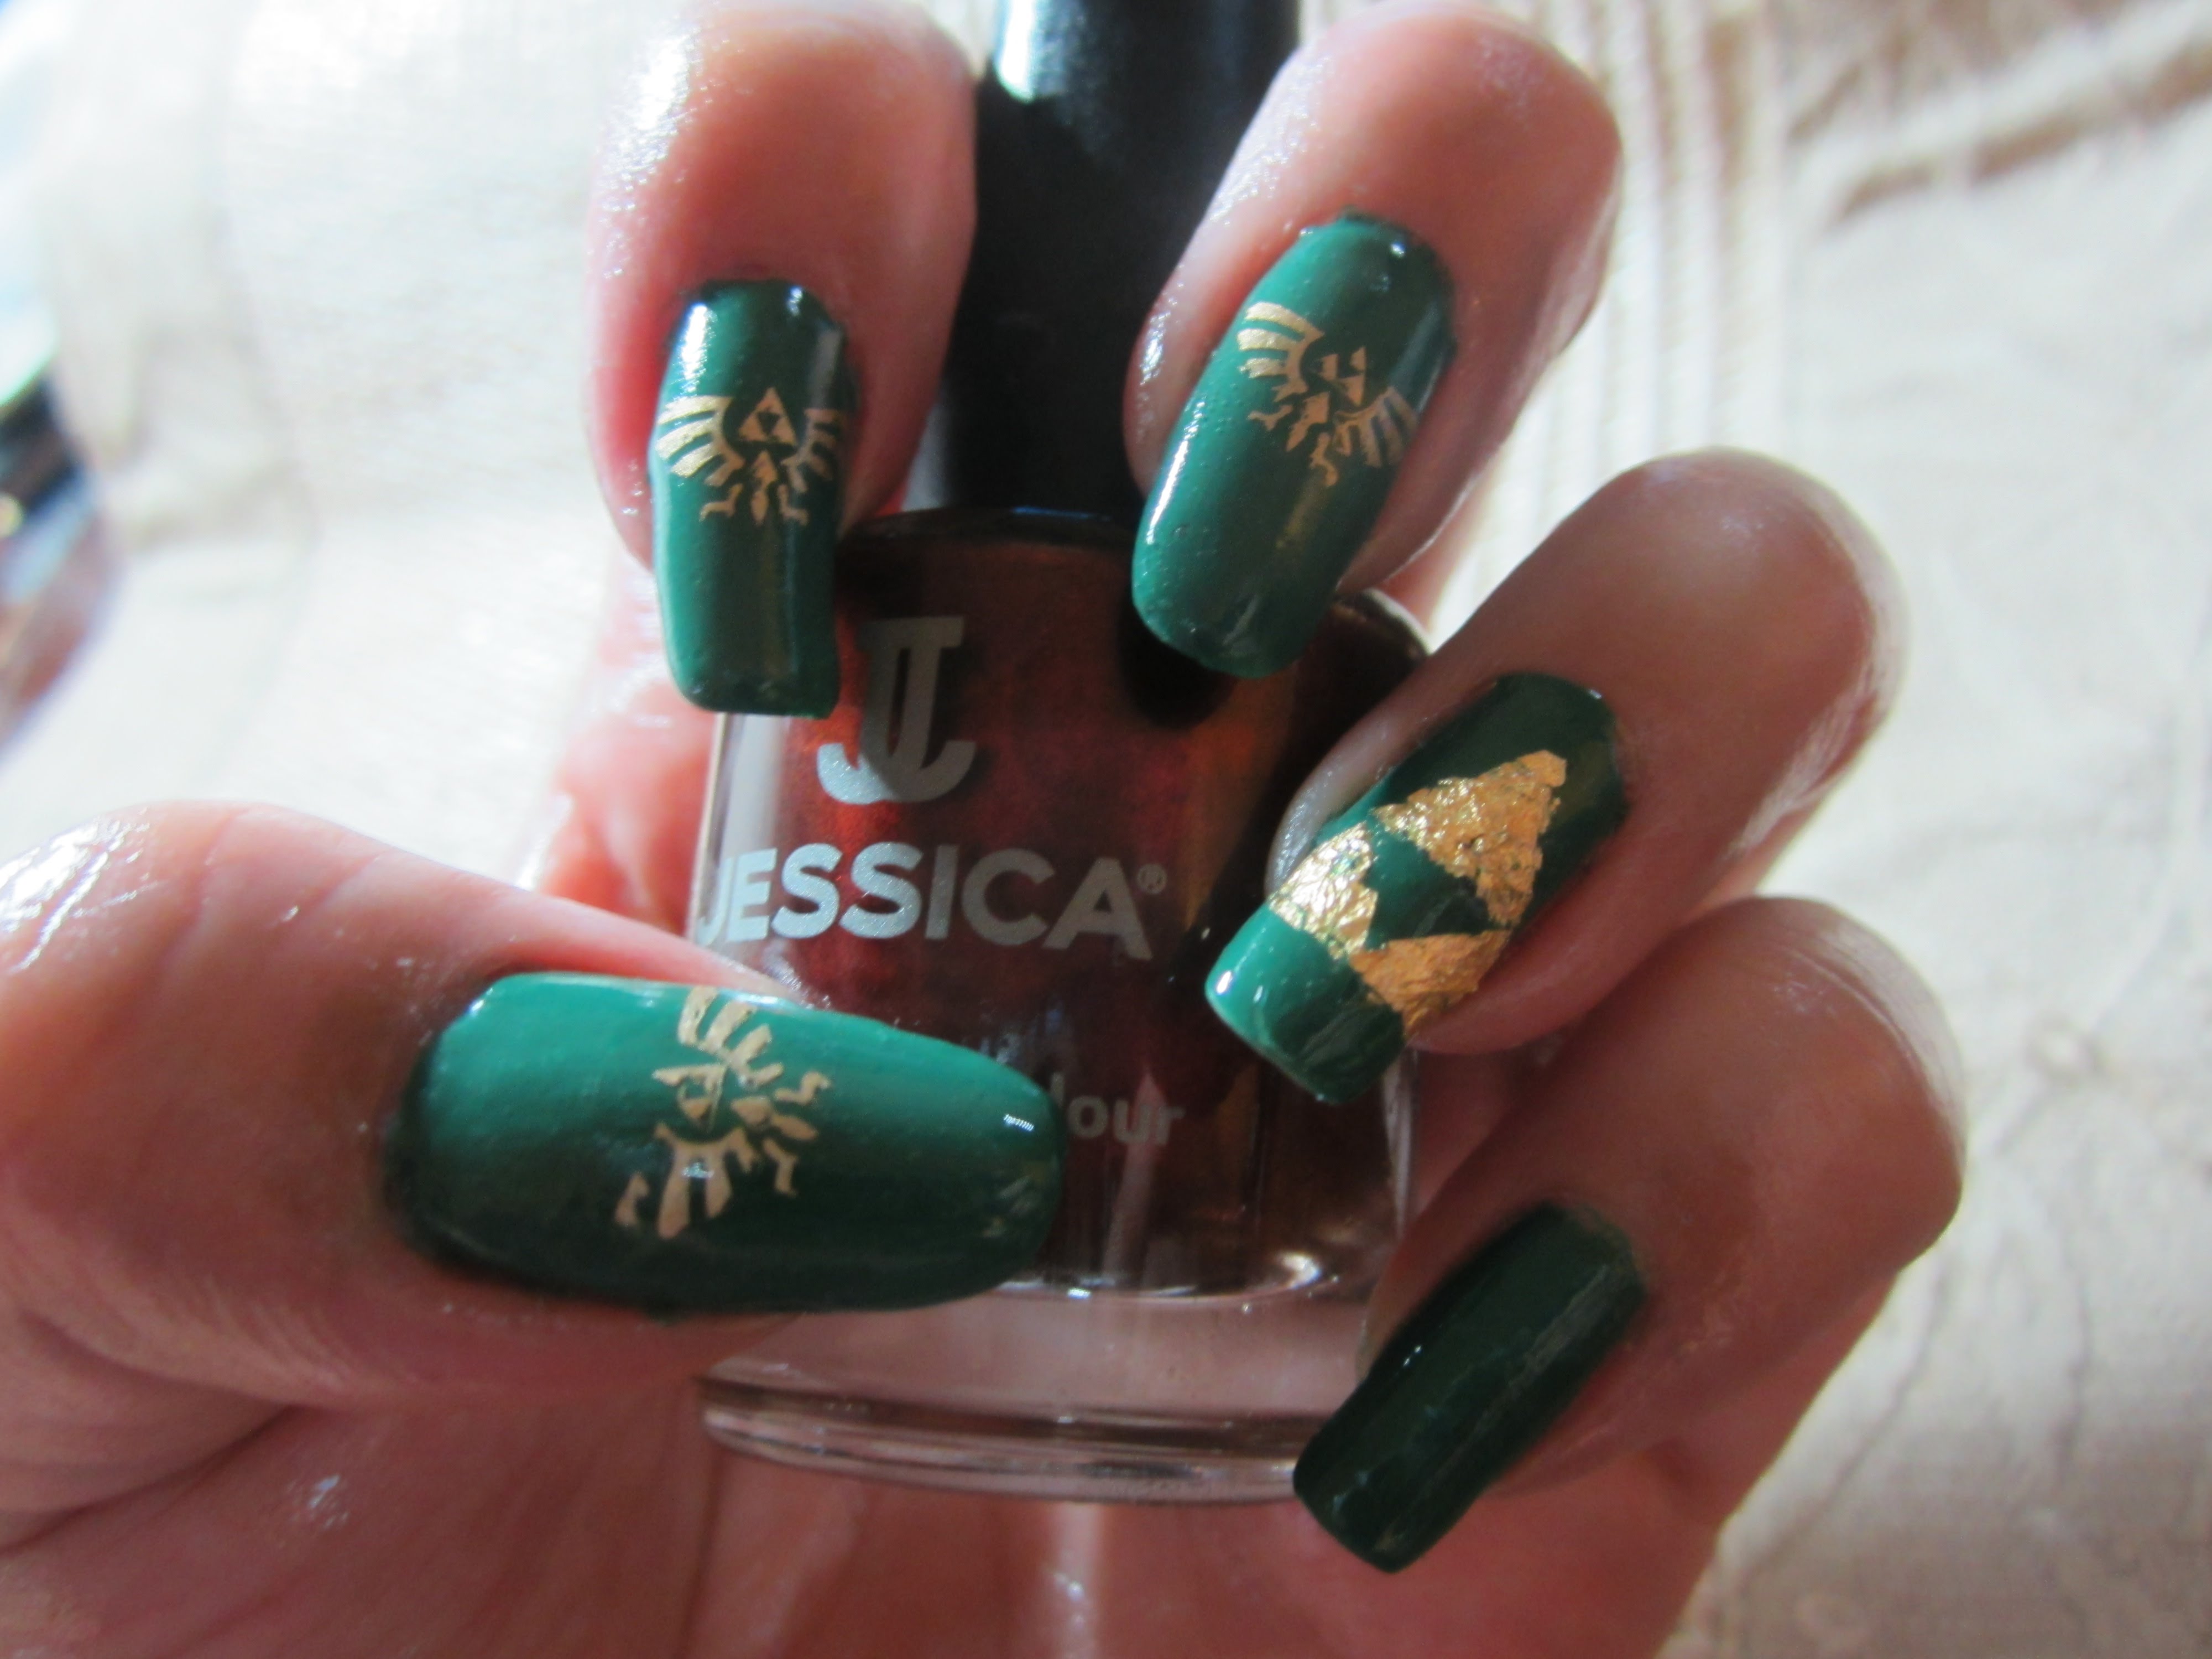 Some cool Green and Gold Zelda inspired nails, my personal favorite